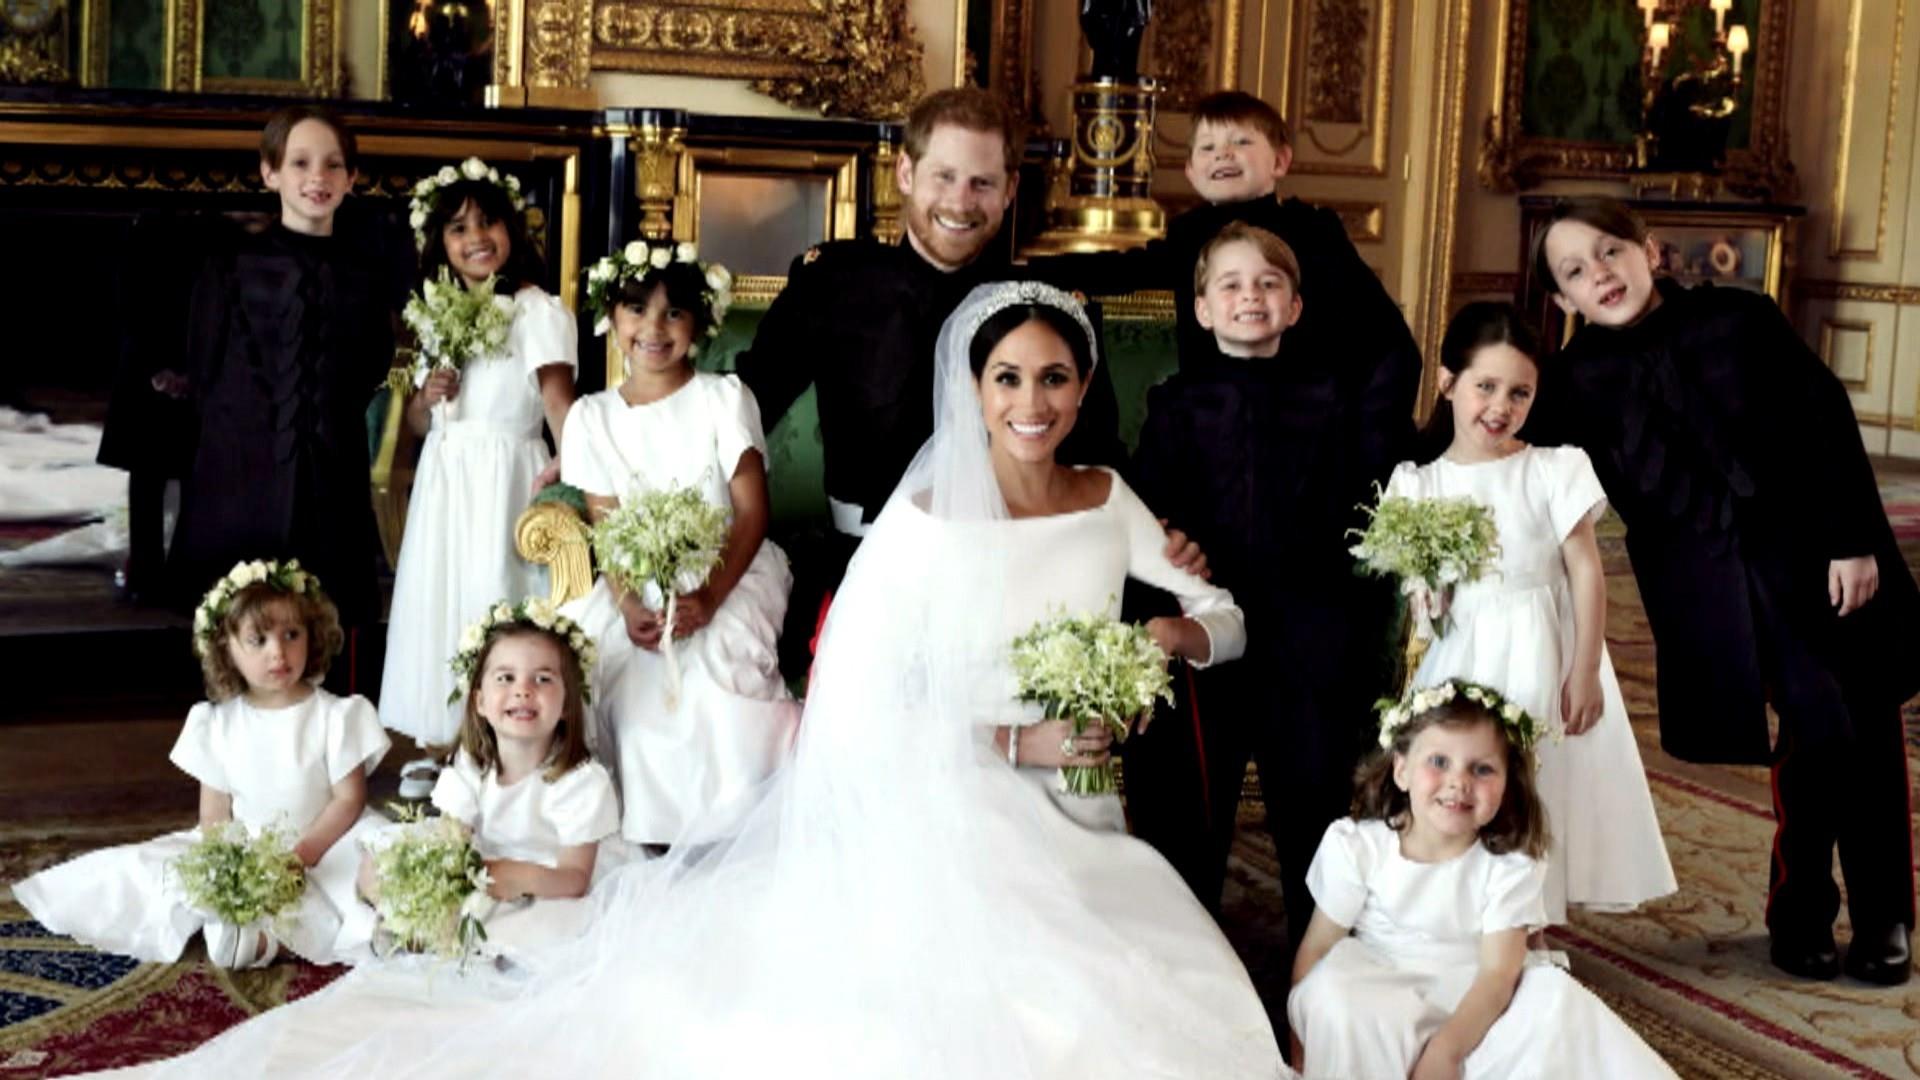 Royal wedding photographer shares behind-the-scenes moments